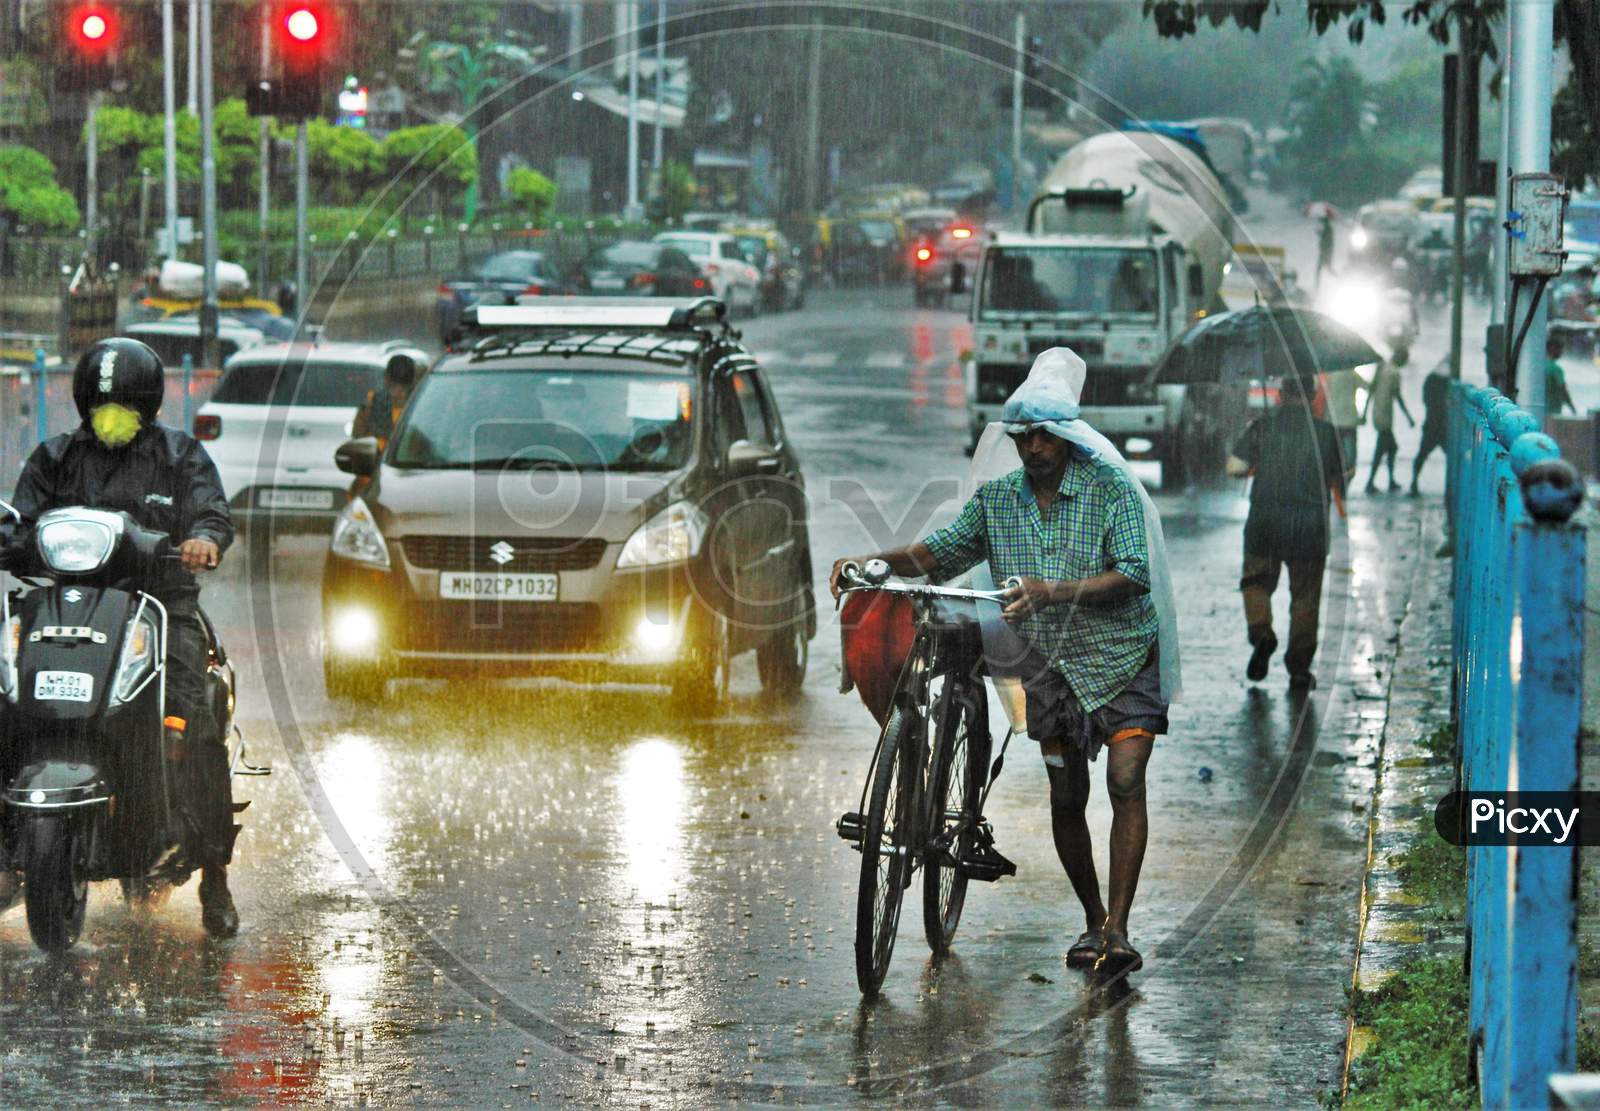 A man walks with his cycle during heavy rains, in Mumbai on July 4, 2020.